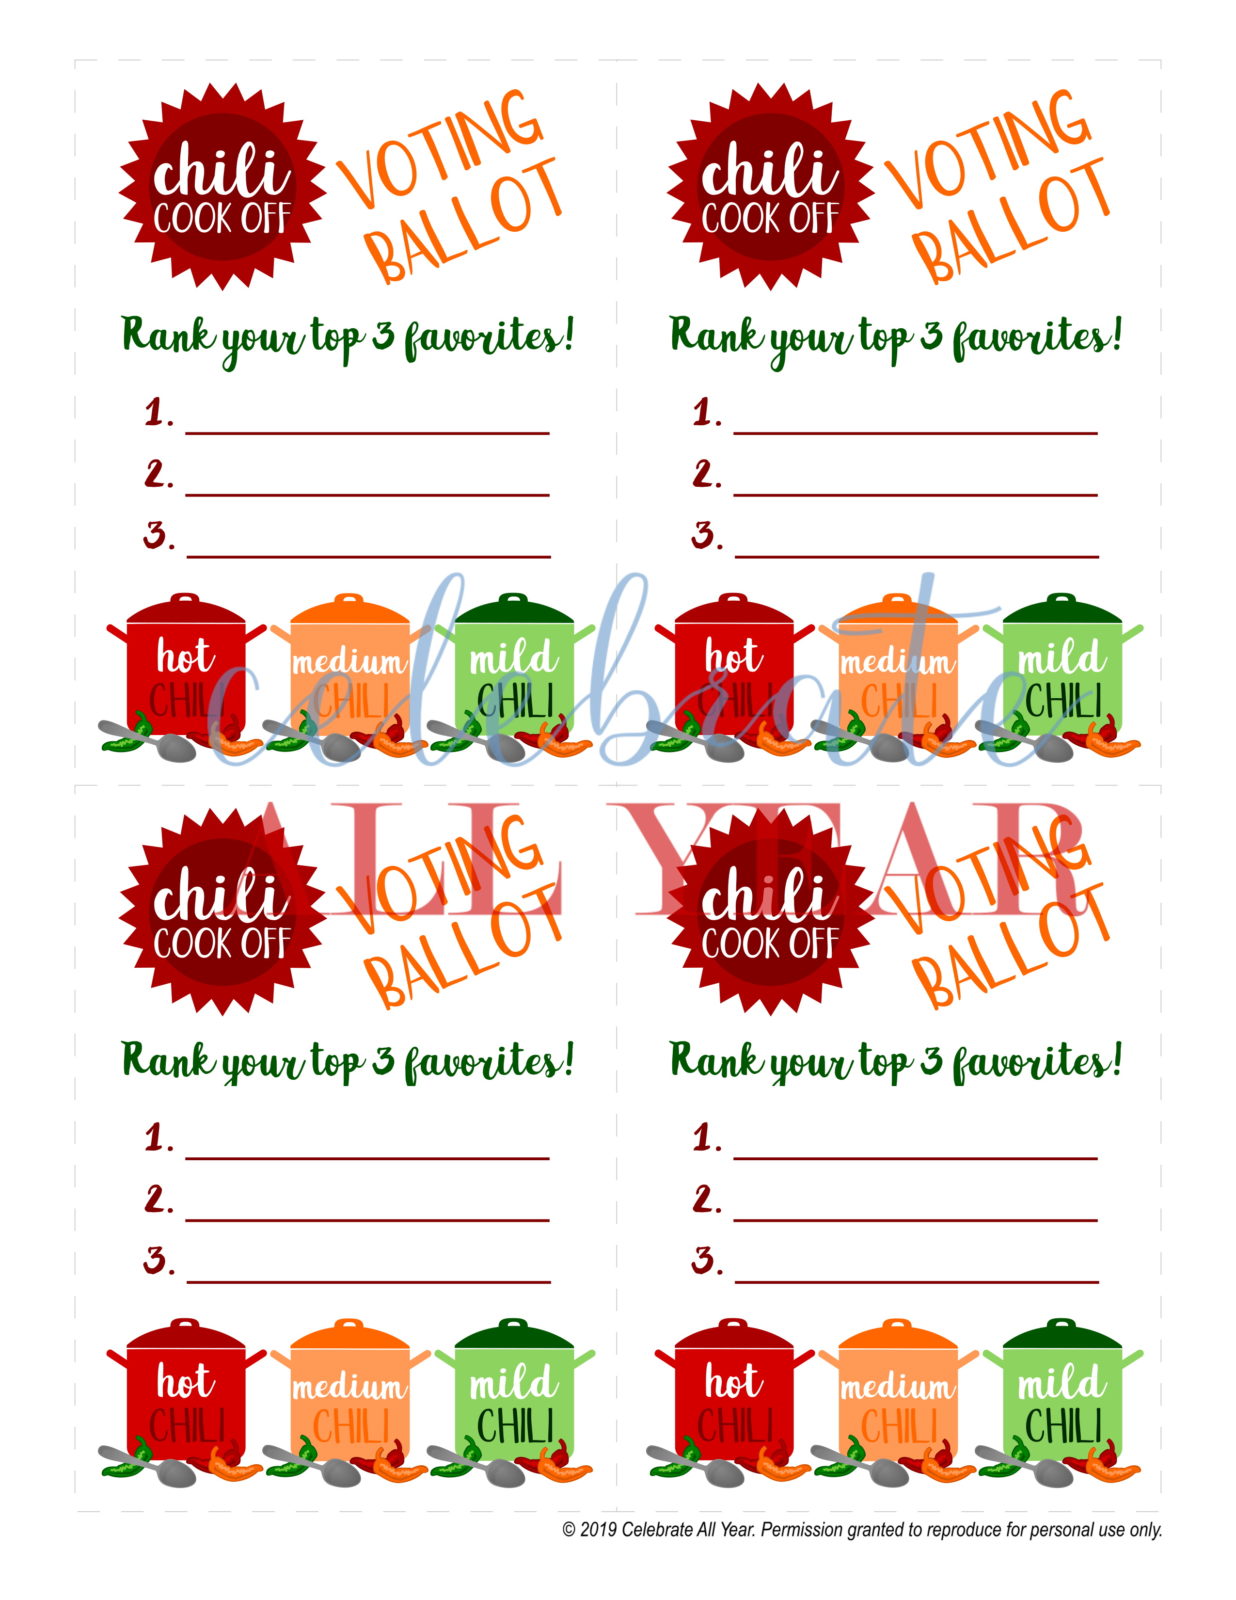 chili-cook-off-printable-kit-celebrate-all-year